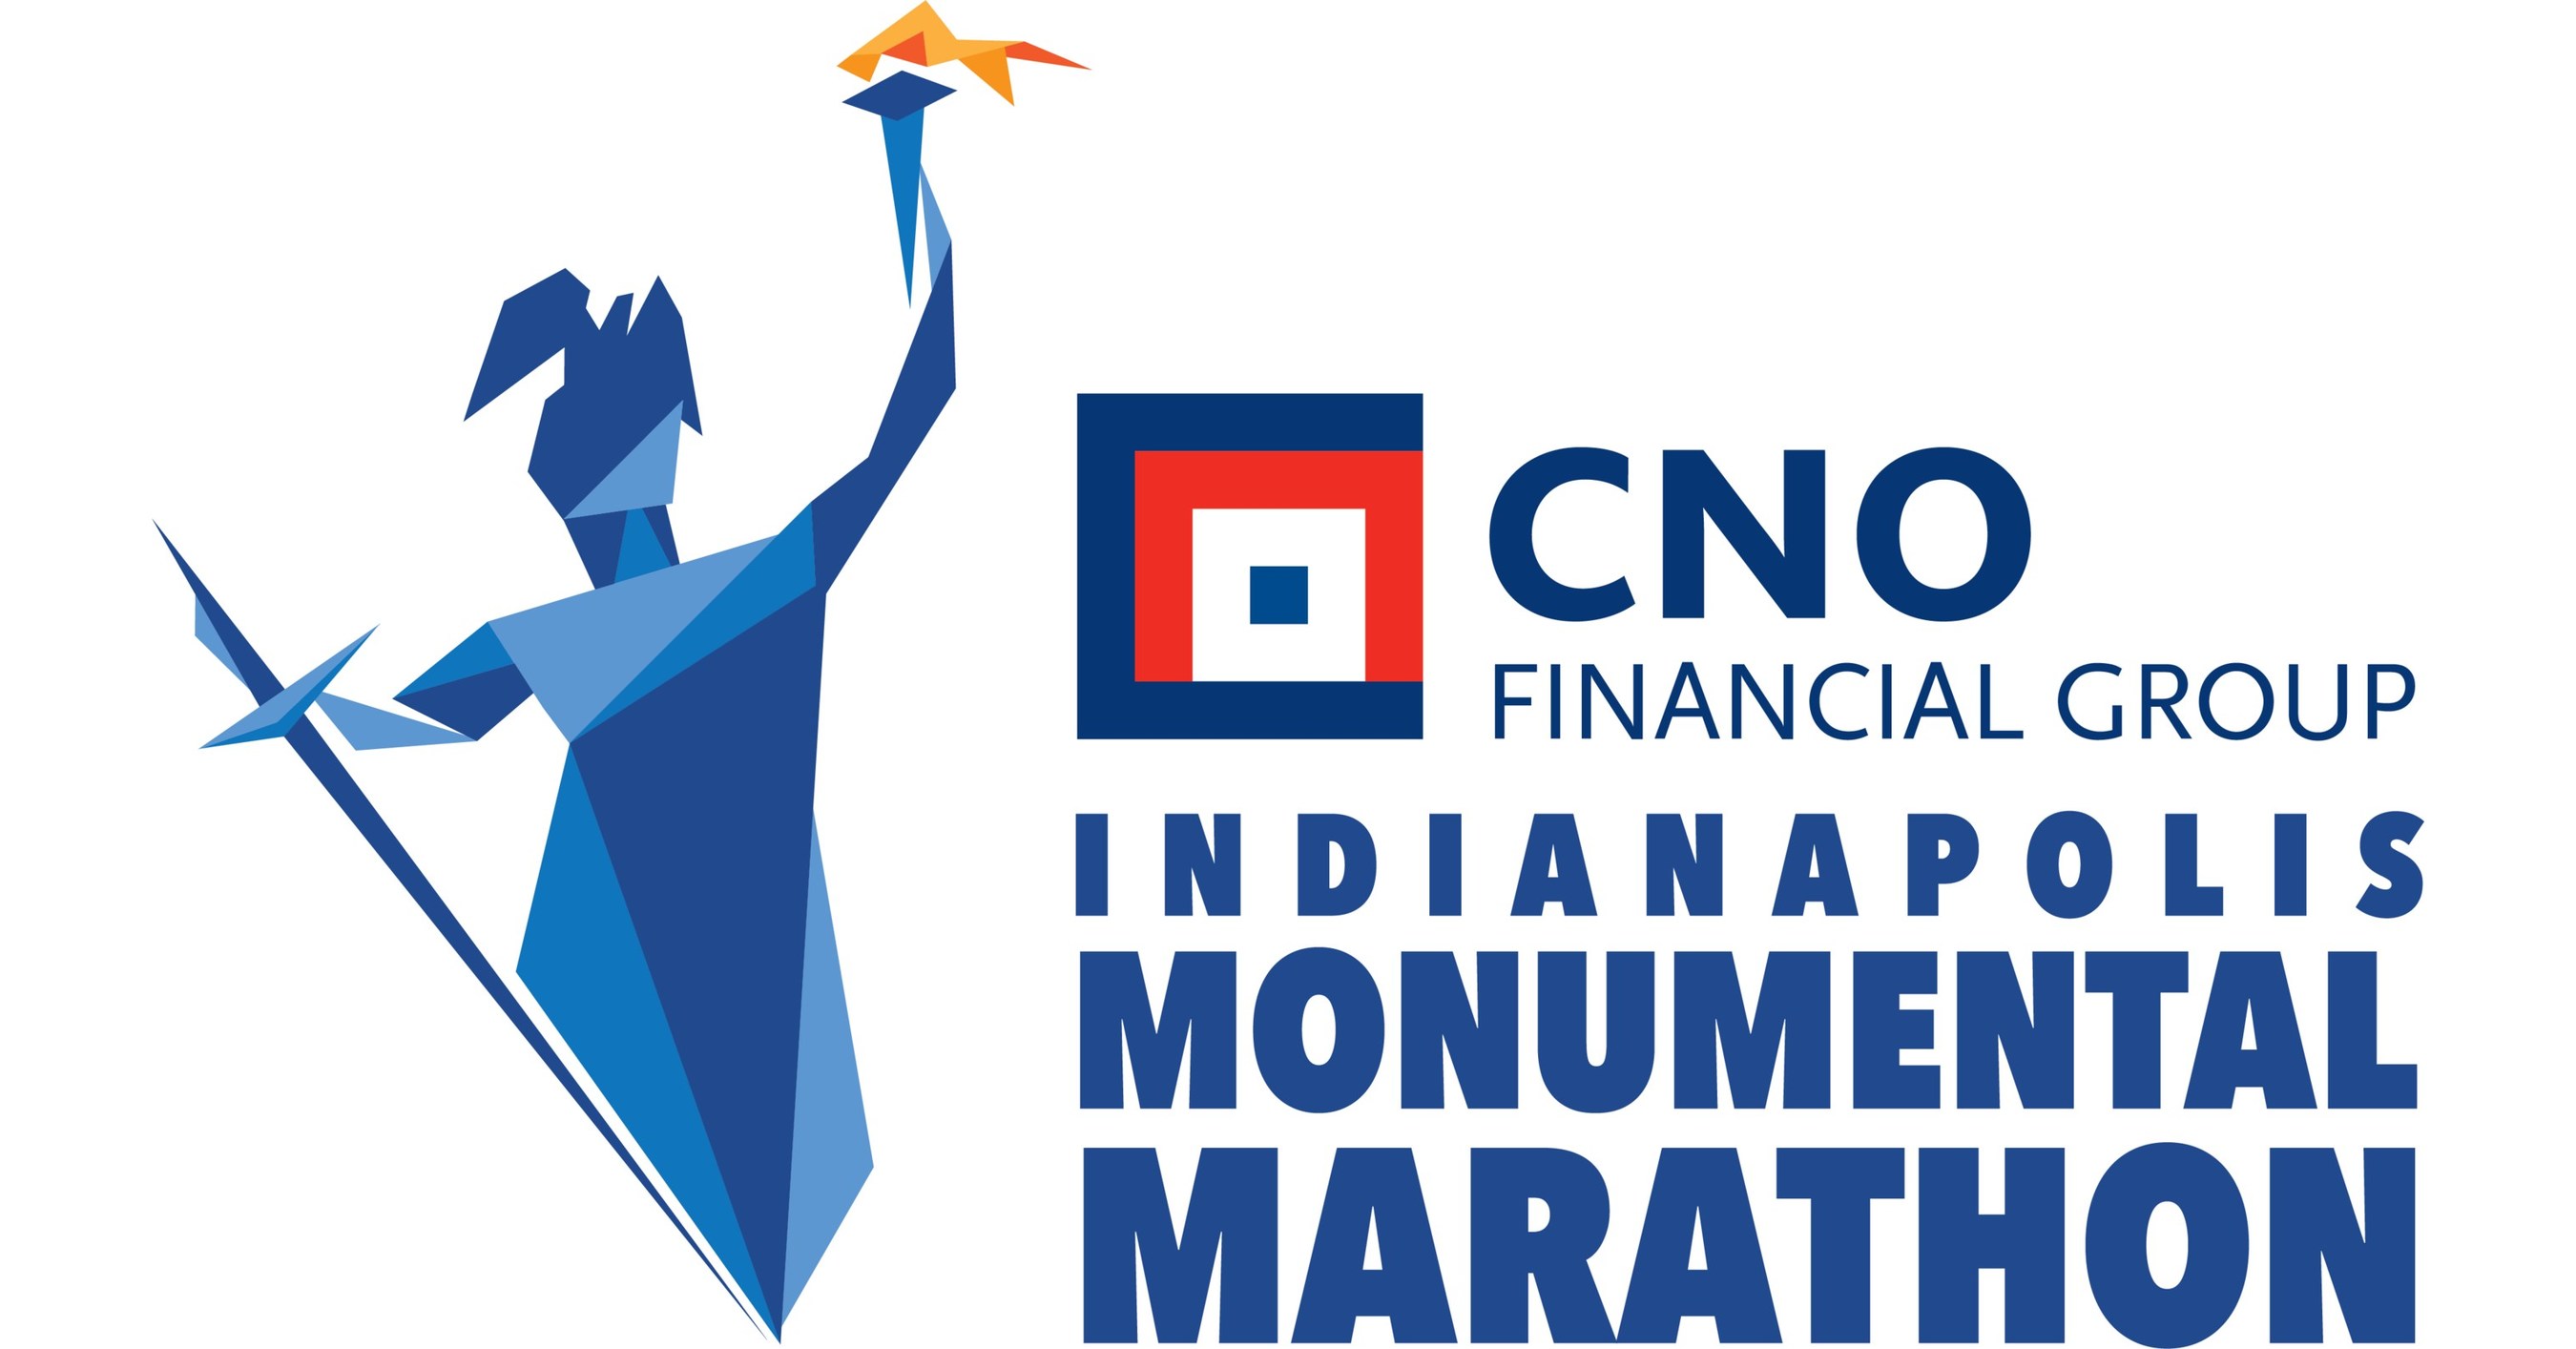 CNO FINANCIAL INDIANAPOLIS MONUMENTAL MARATHON CELEBRATES ITS 15TH ANNIVERSARY EVENT IN STYLE